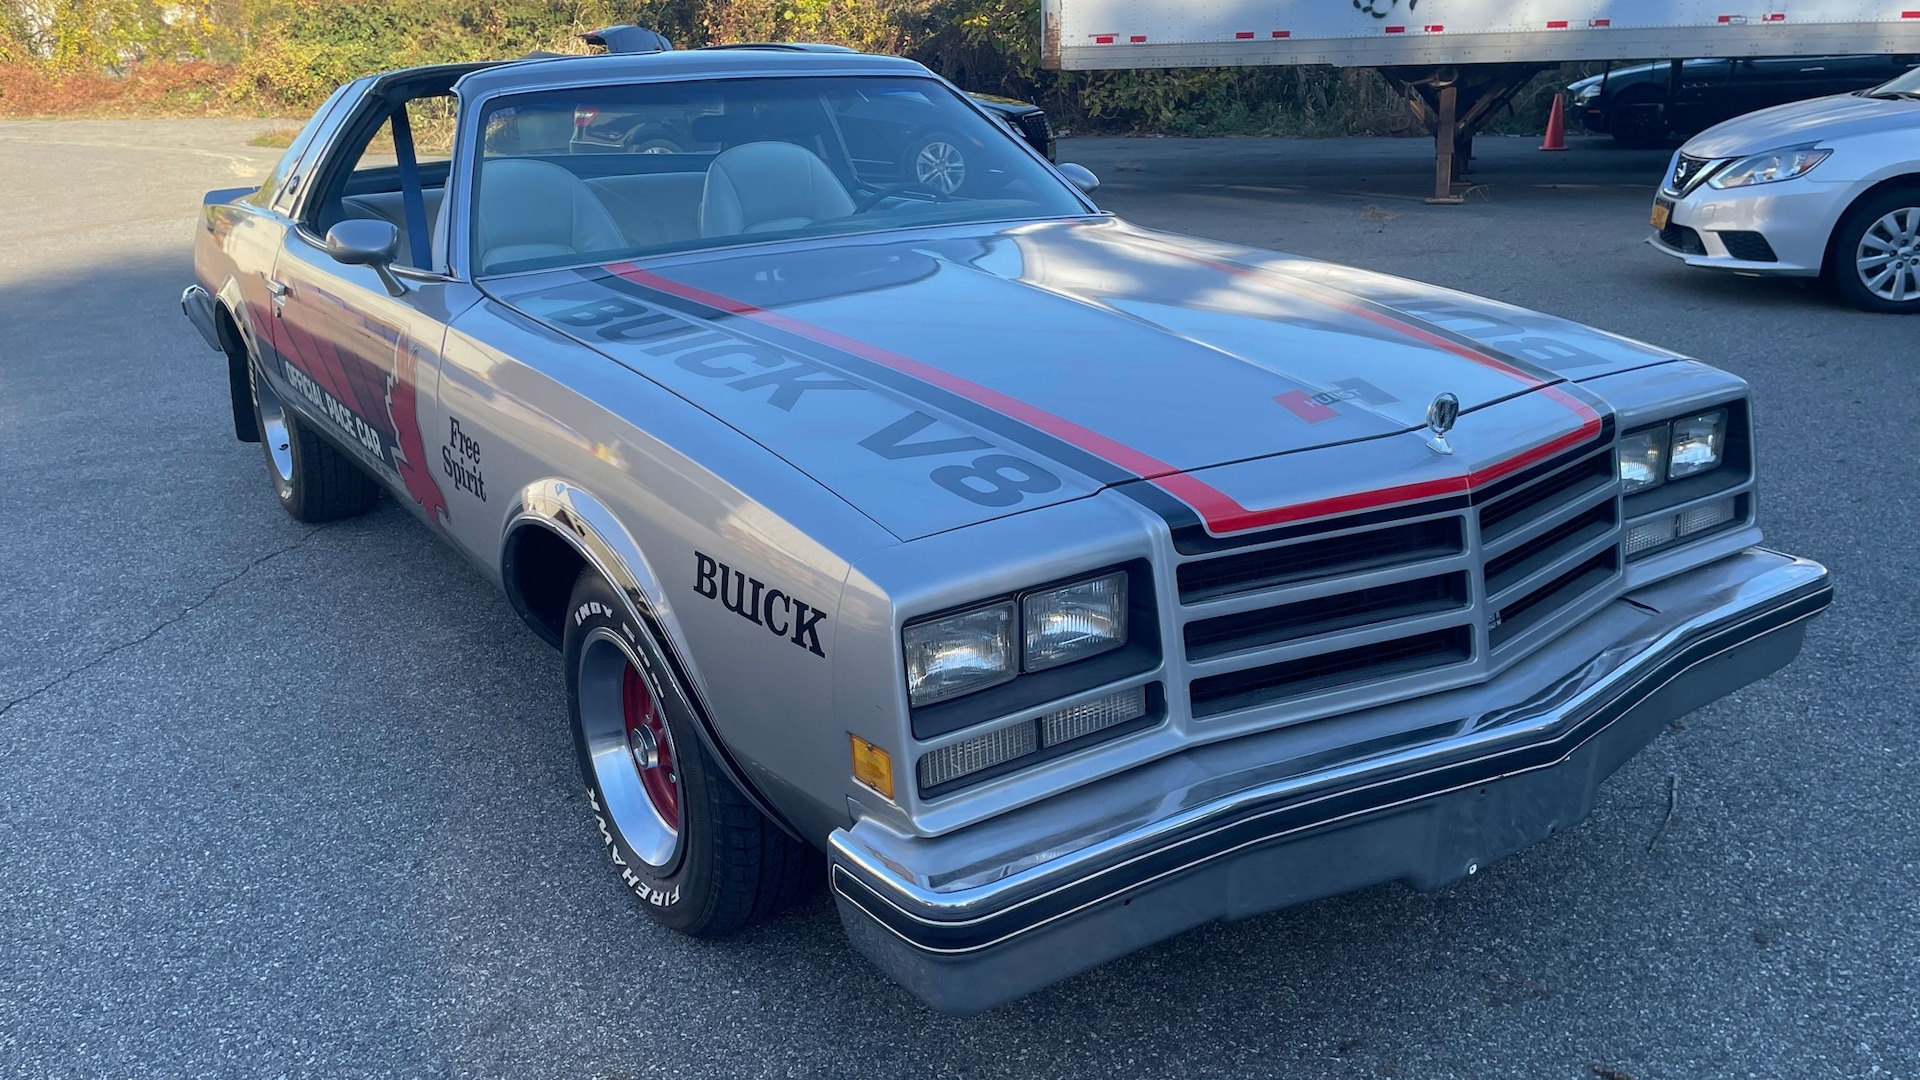 1976 Buick Century Pace Car Edition: The Most Unlikely Indy Pace Car